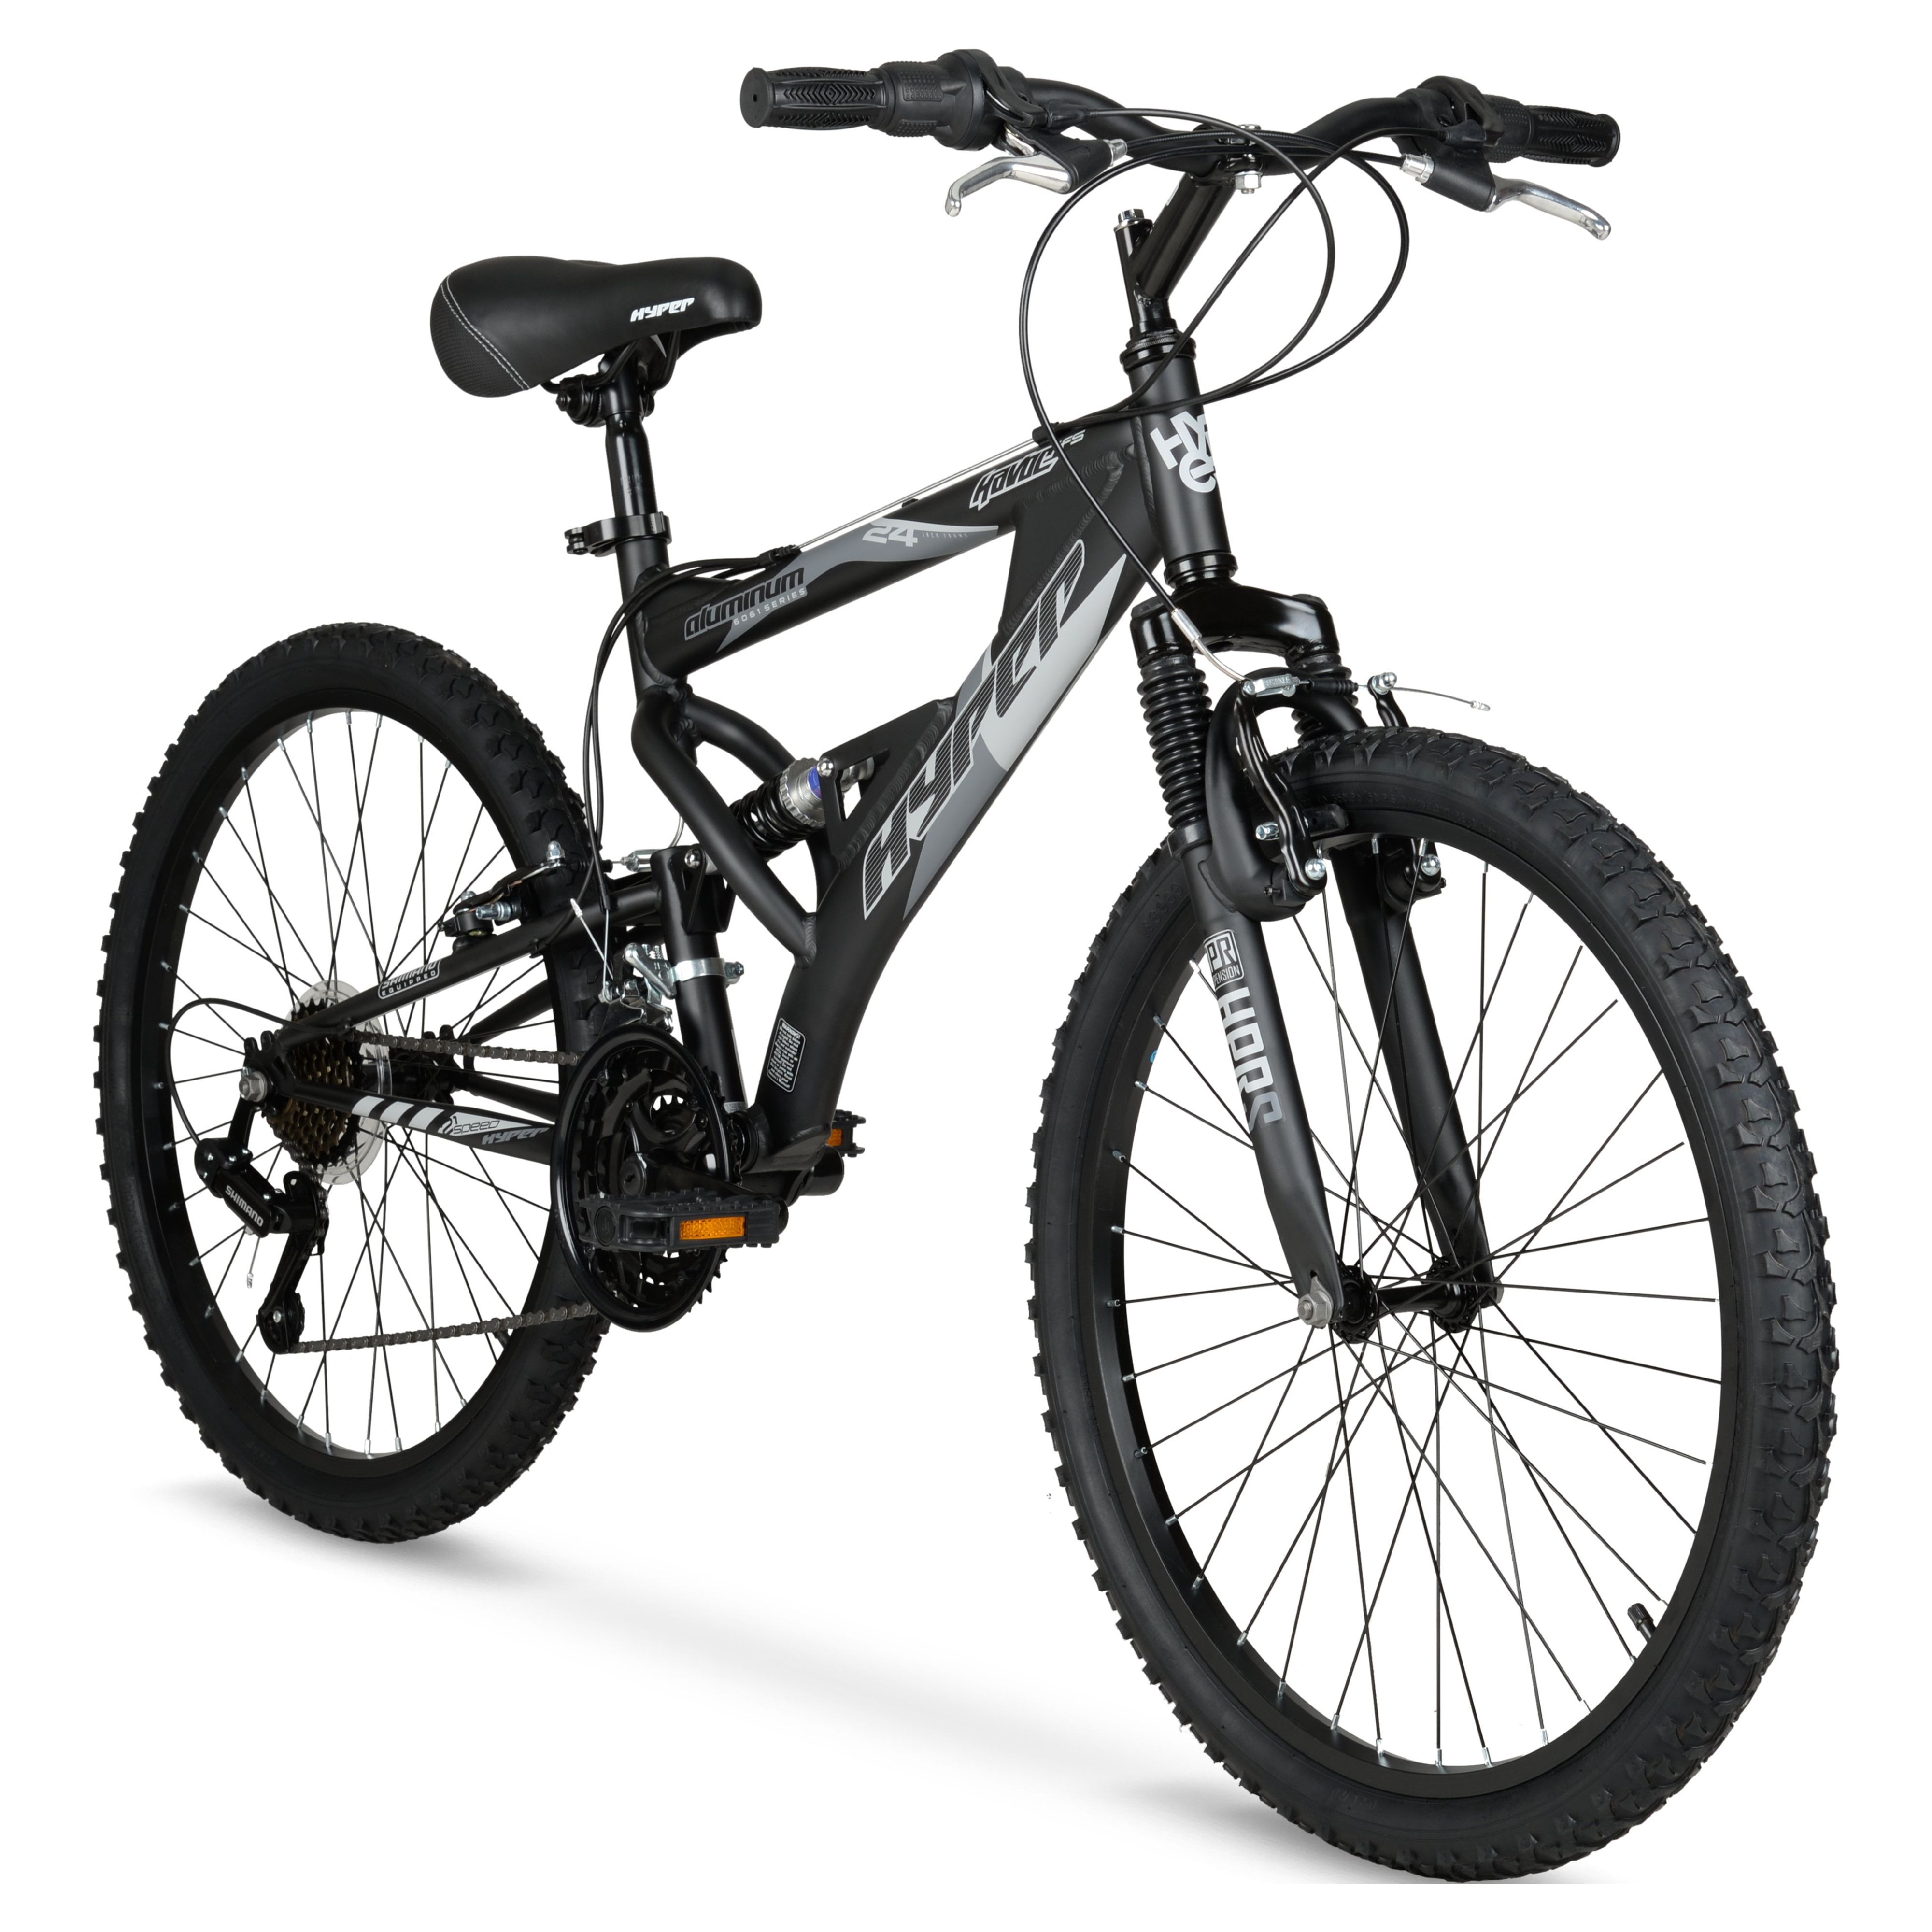 Hyper Bicycles 24" Boy's Havoc Mountain Bike, Black, Recommended Ages group 10 to 14 Years Old - image 2 of 14